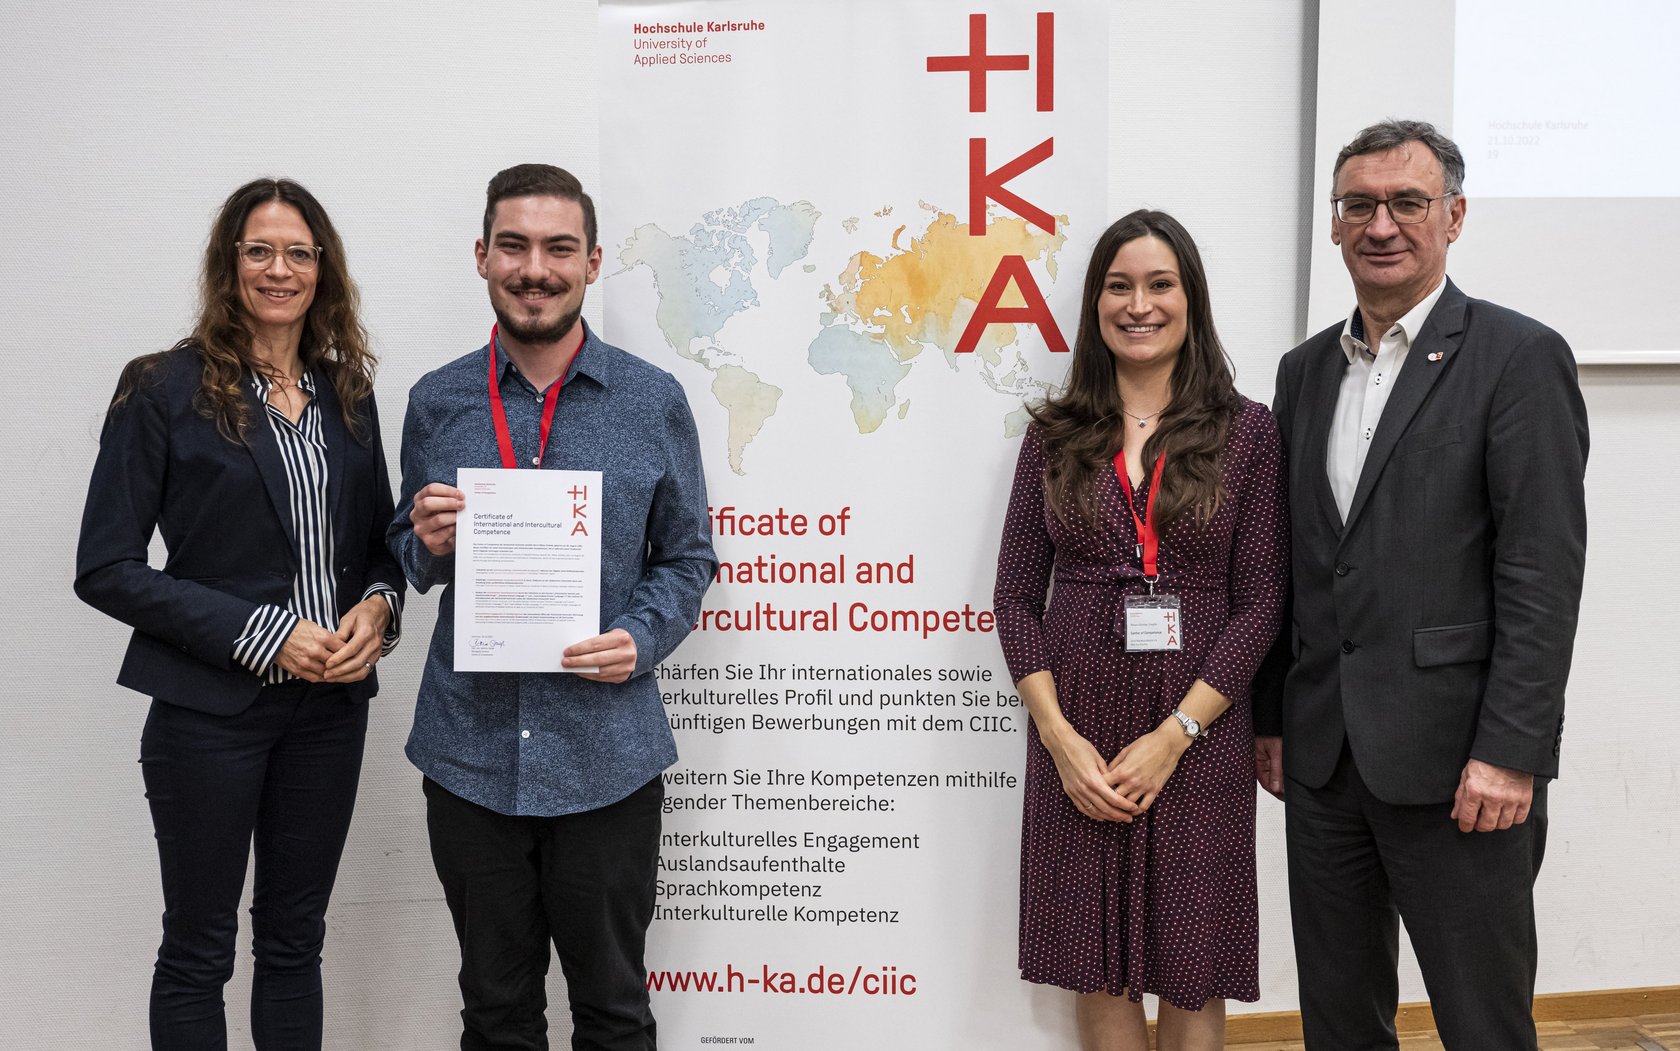 student standing in front of CIIC rollup, presenting his certificate, and surrounded by HKA representatives